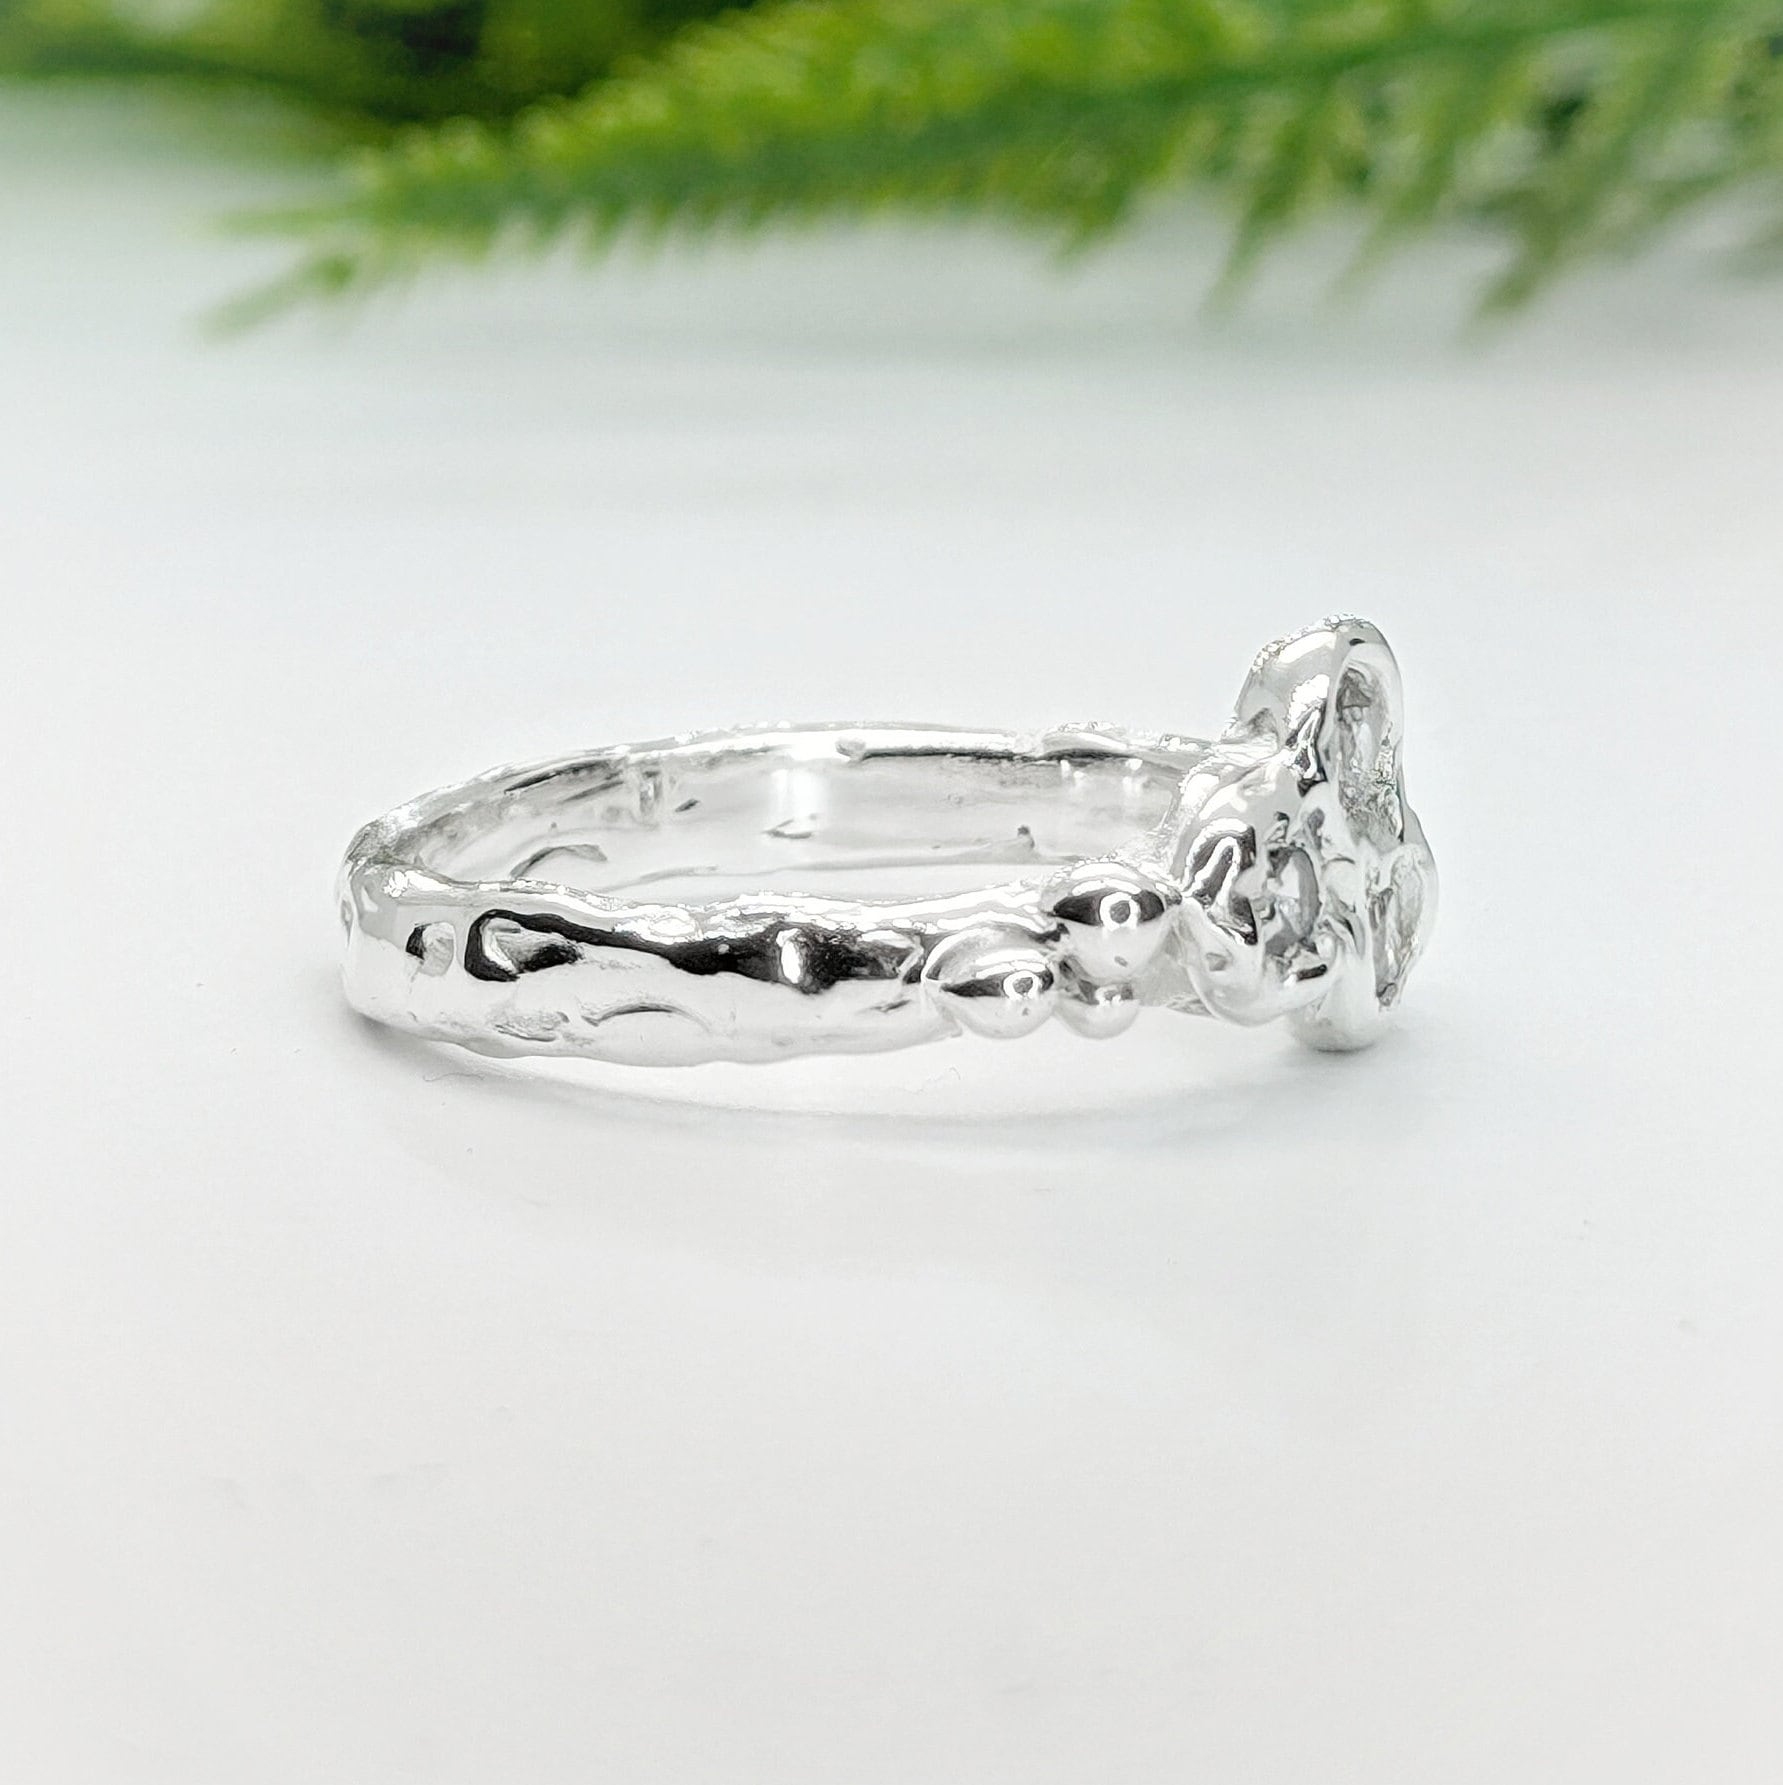 Cluster of 3 Cubic Zirconias set on a Molten Silver textured band